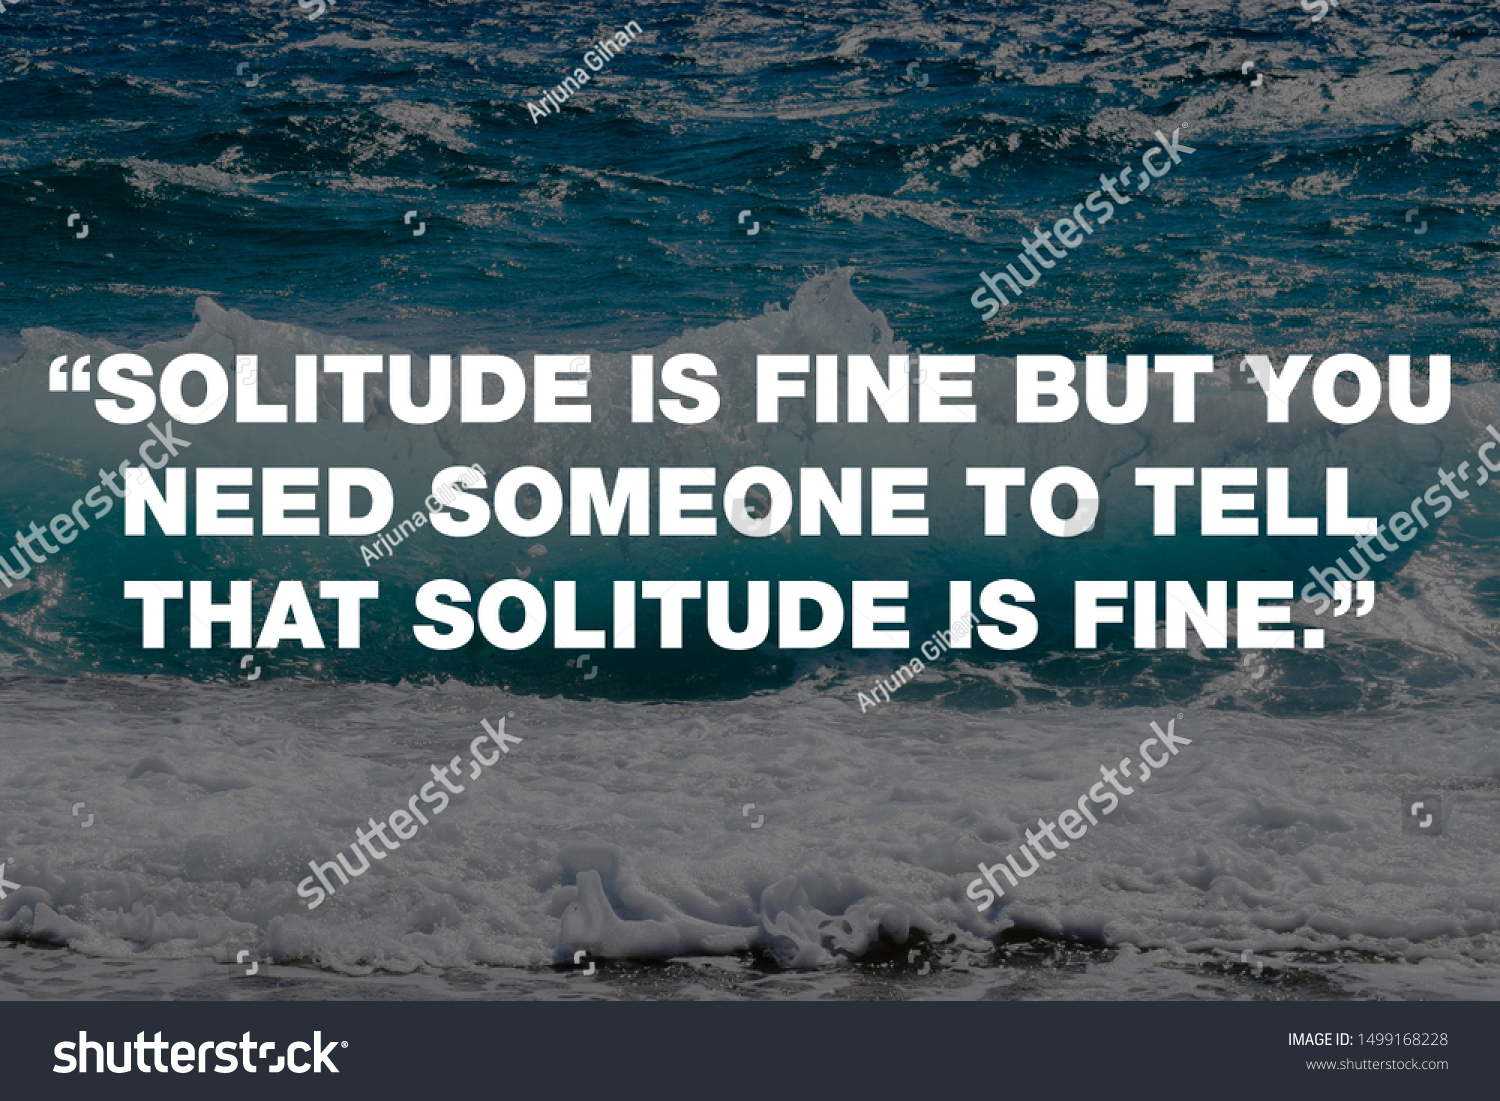 “Solitude is fine but you need someone to tell that solitude is fine.”  #1499168228